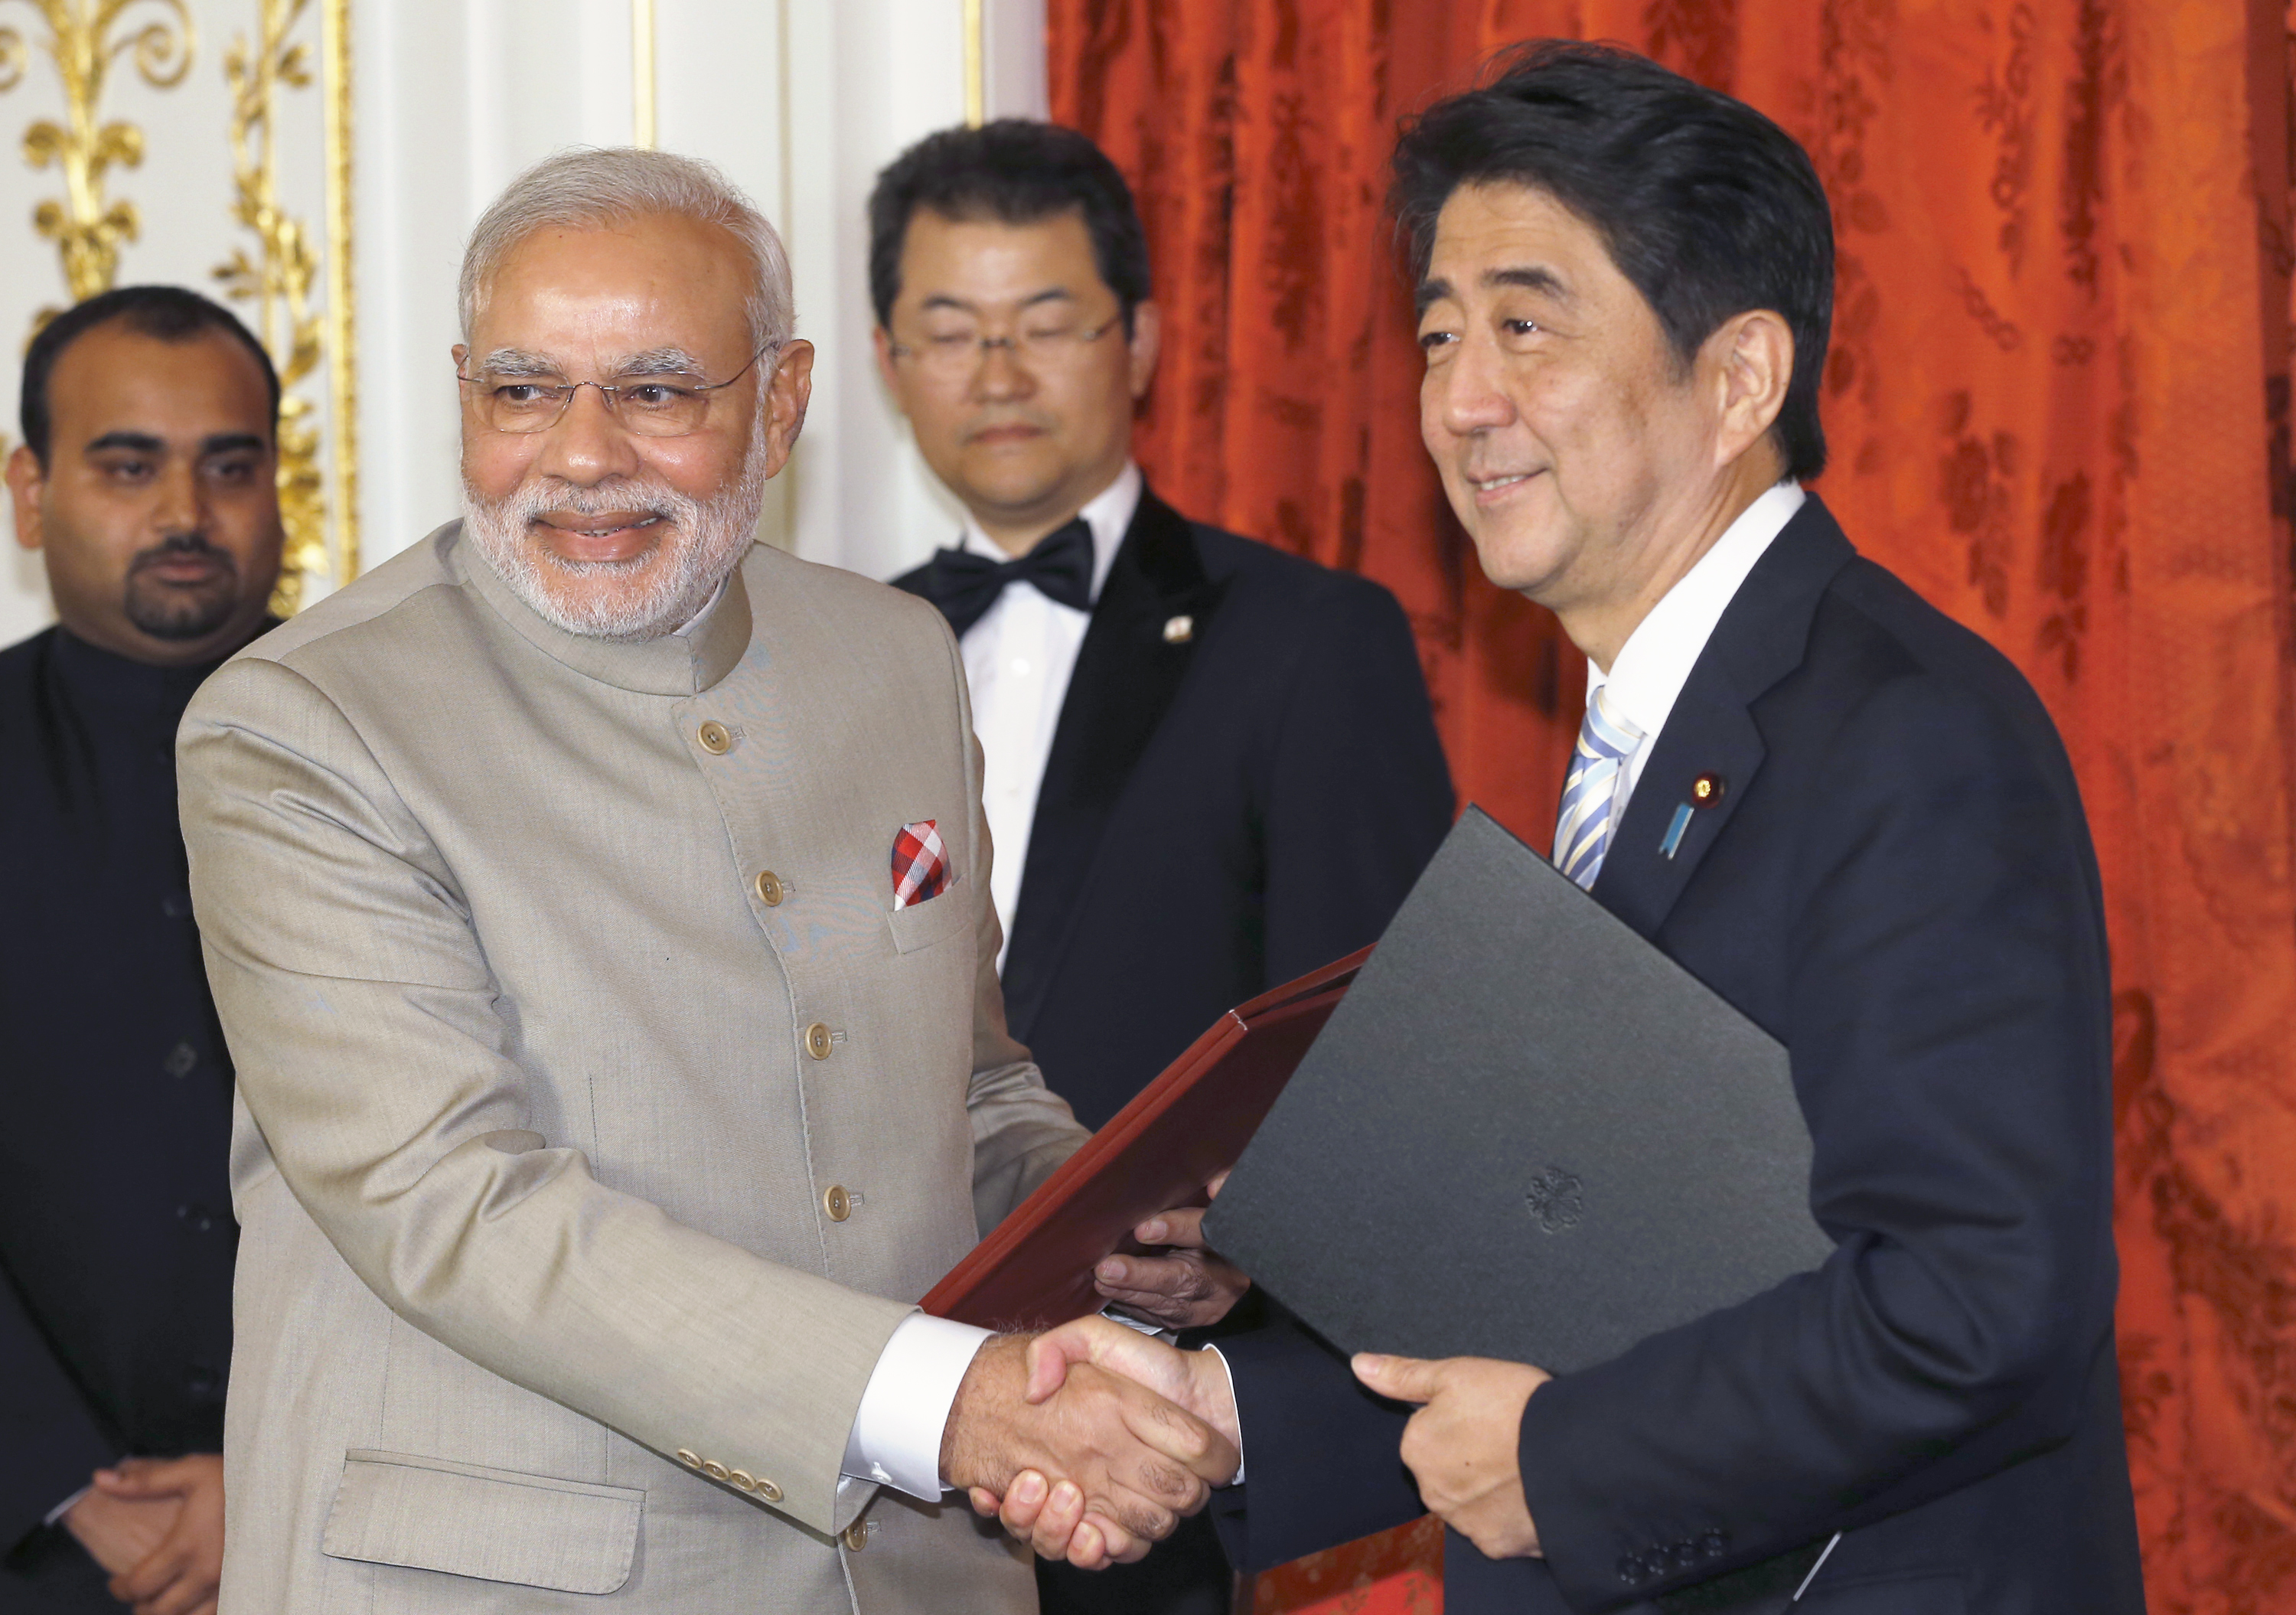 India's Prime Minister Narendra Modi, left, shakes hands with Japan's Prime Minister Shinzo Abe during a signing ceremony in Tokyo on Sept. 1, 2014 (Shizuo Kambayashi—Reuters)